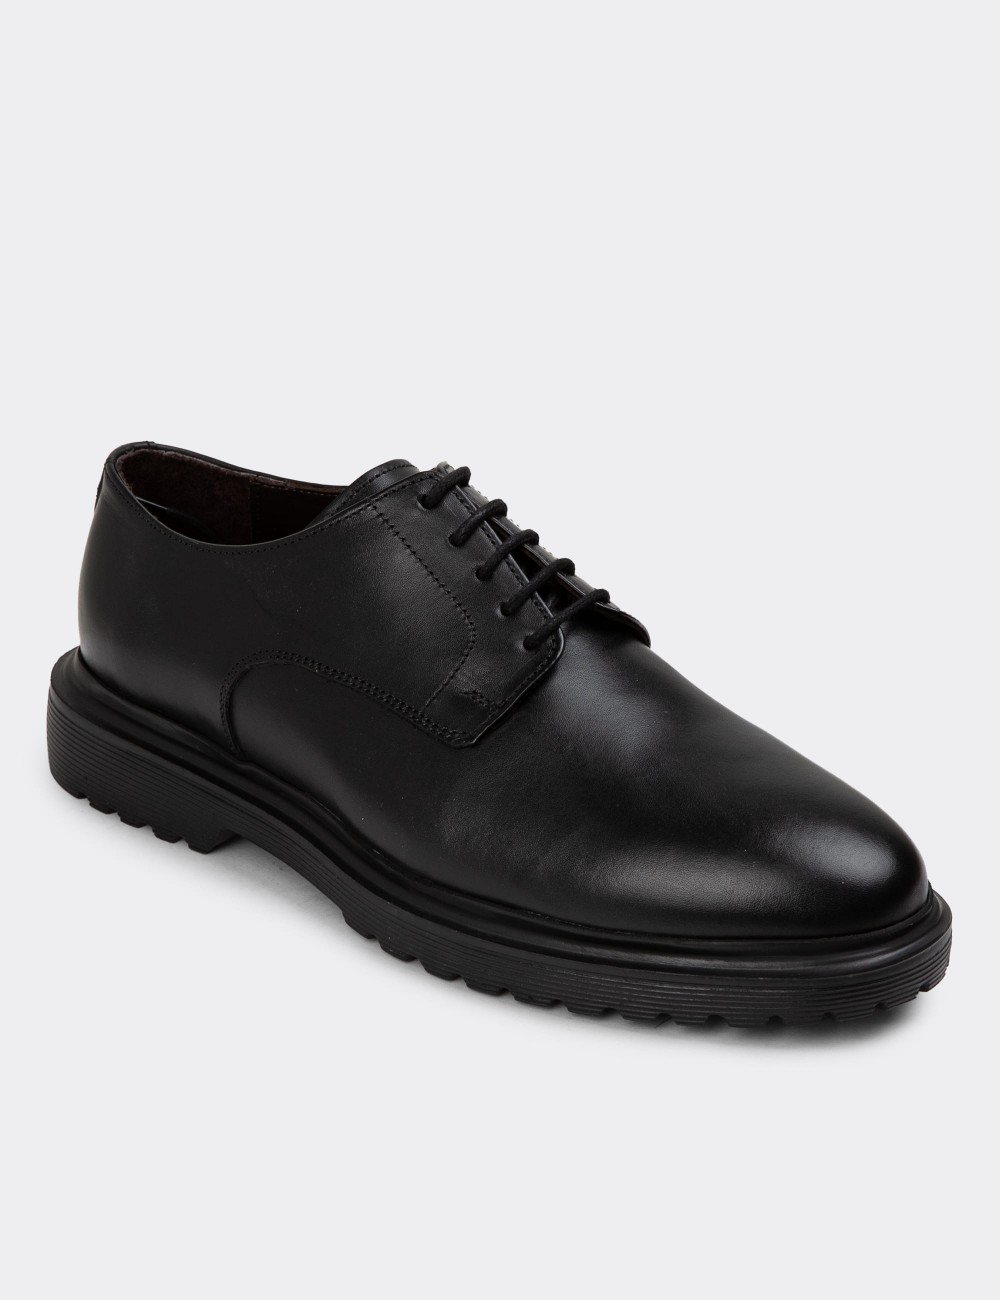 Black Leather Lace-up Shoes - 01932MSYHE05